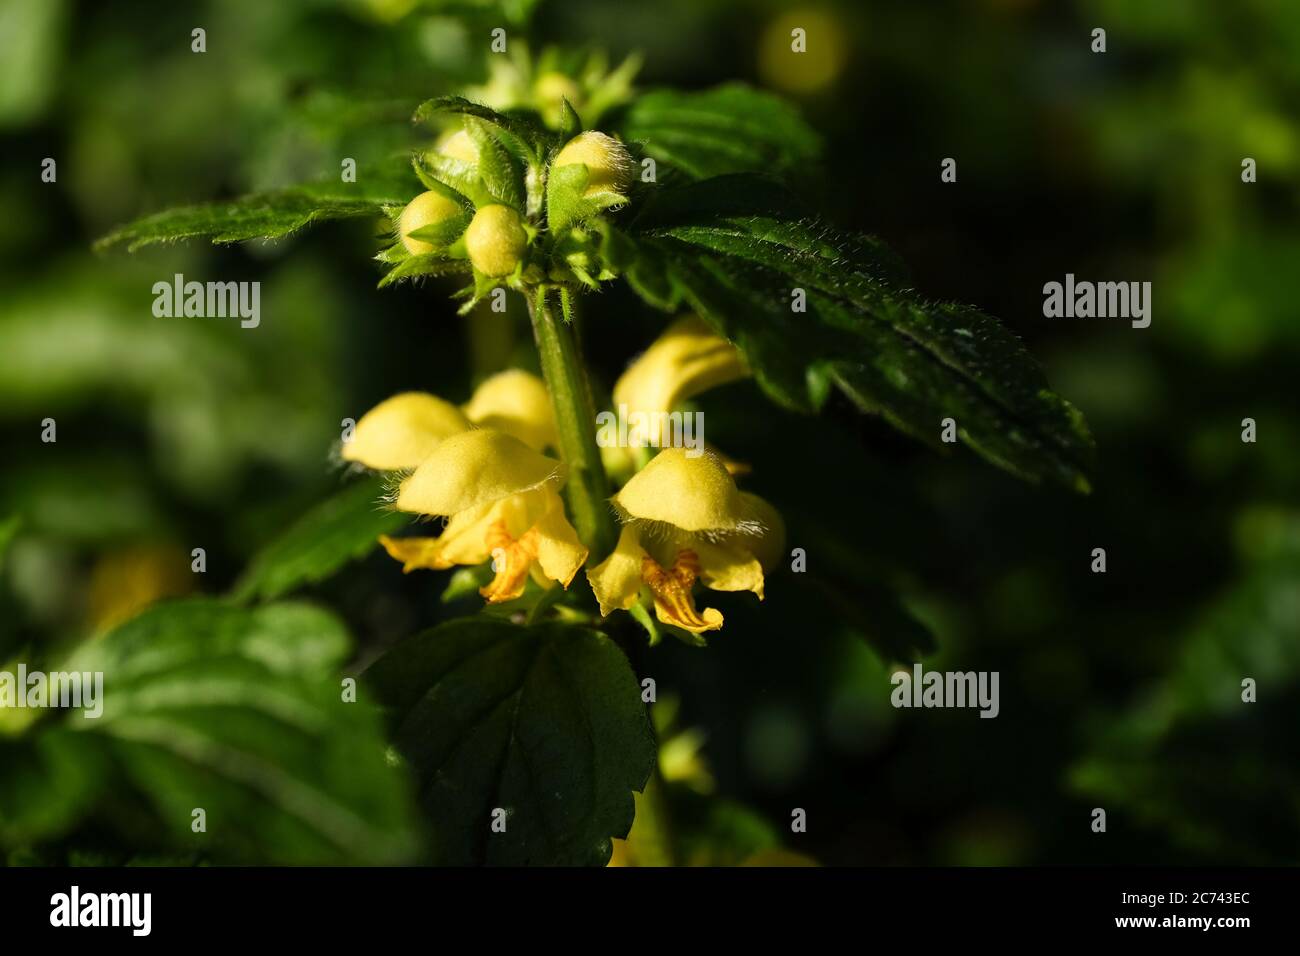 Close up of Yellow Lamium or dead-nettles in a garden. The fine outgrowths or hairs, fine outgrowths on the leaves, buds and flowers are clearly visib Stock Photo